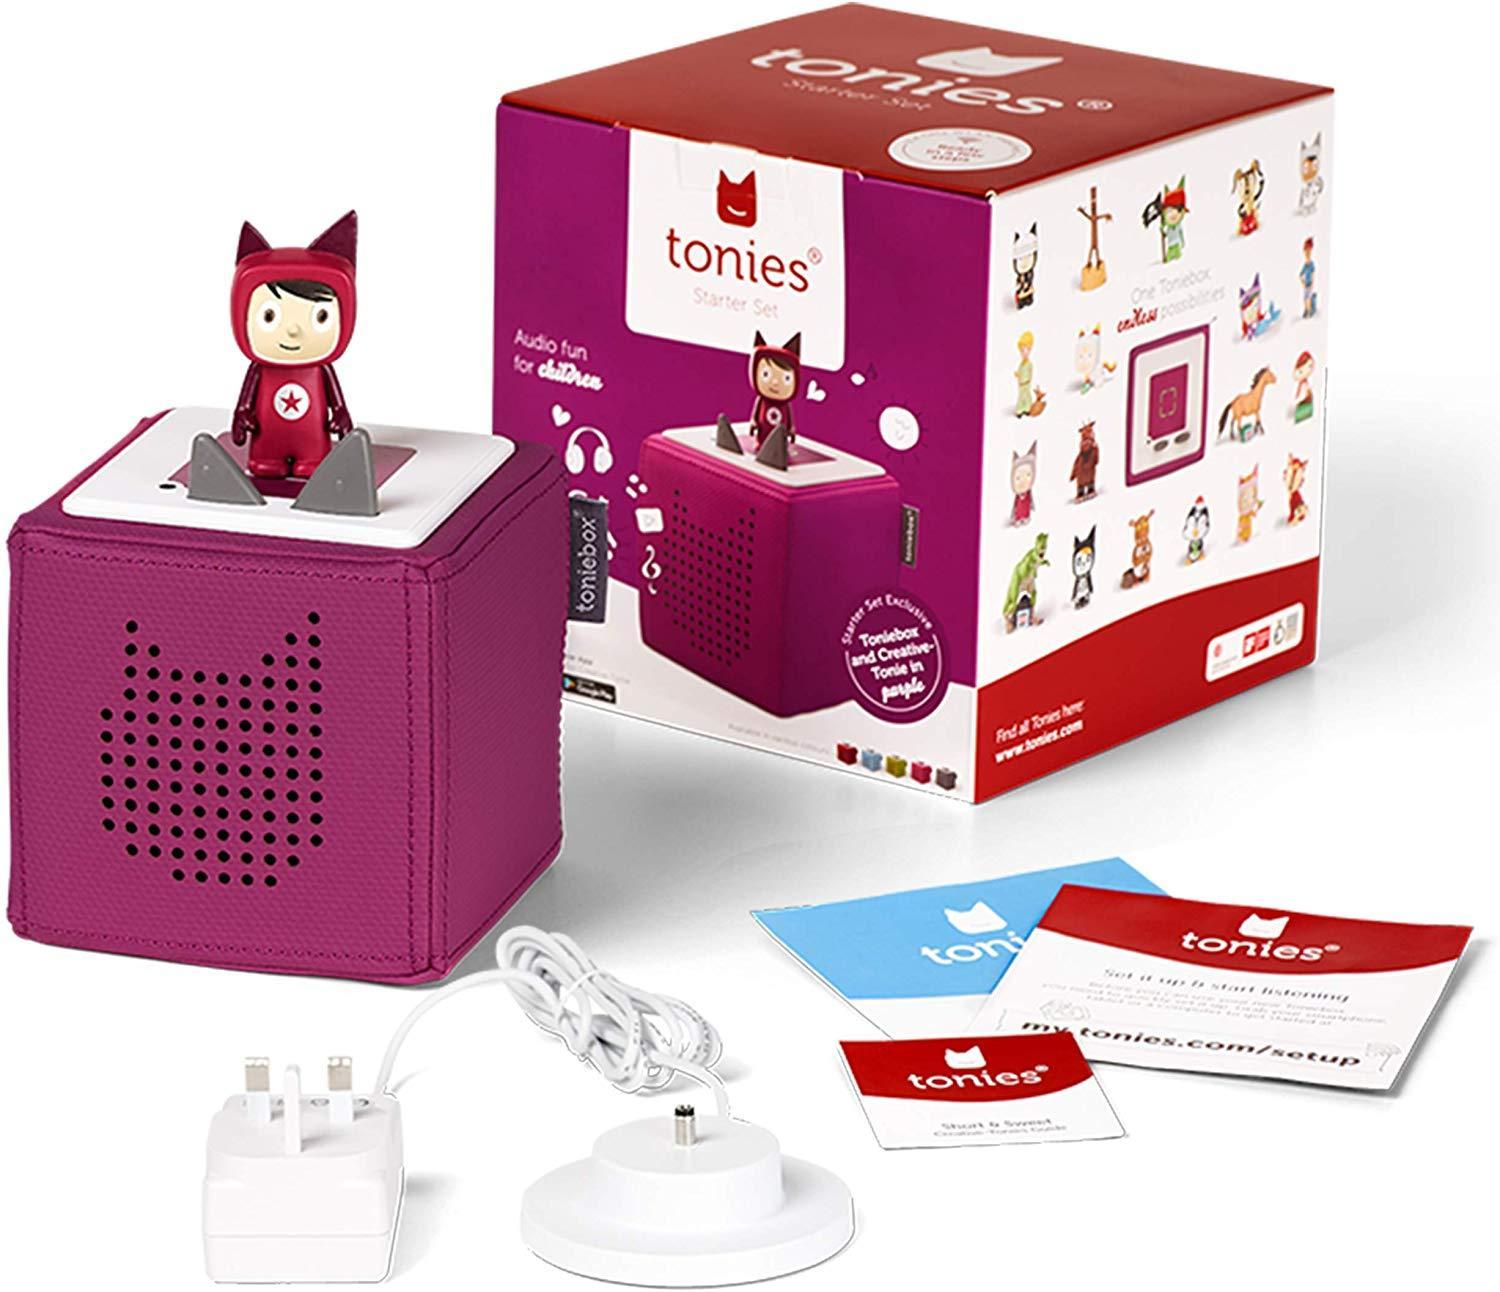 Toniebox starter kit showing Toniebox, cable and instruction booklet.